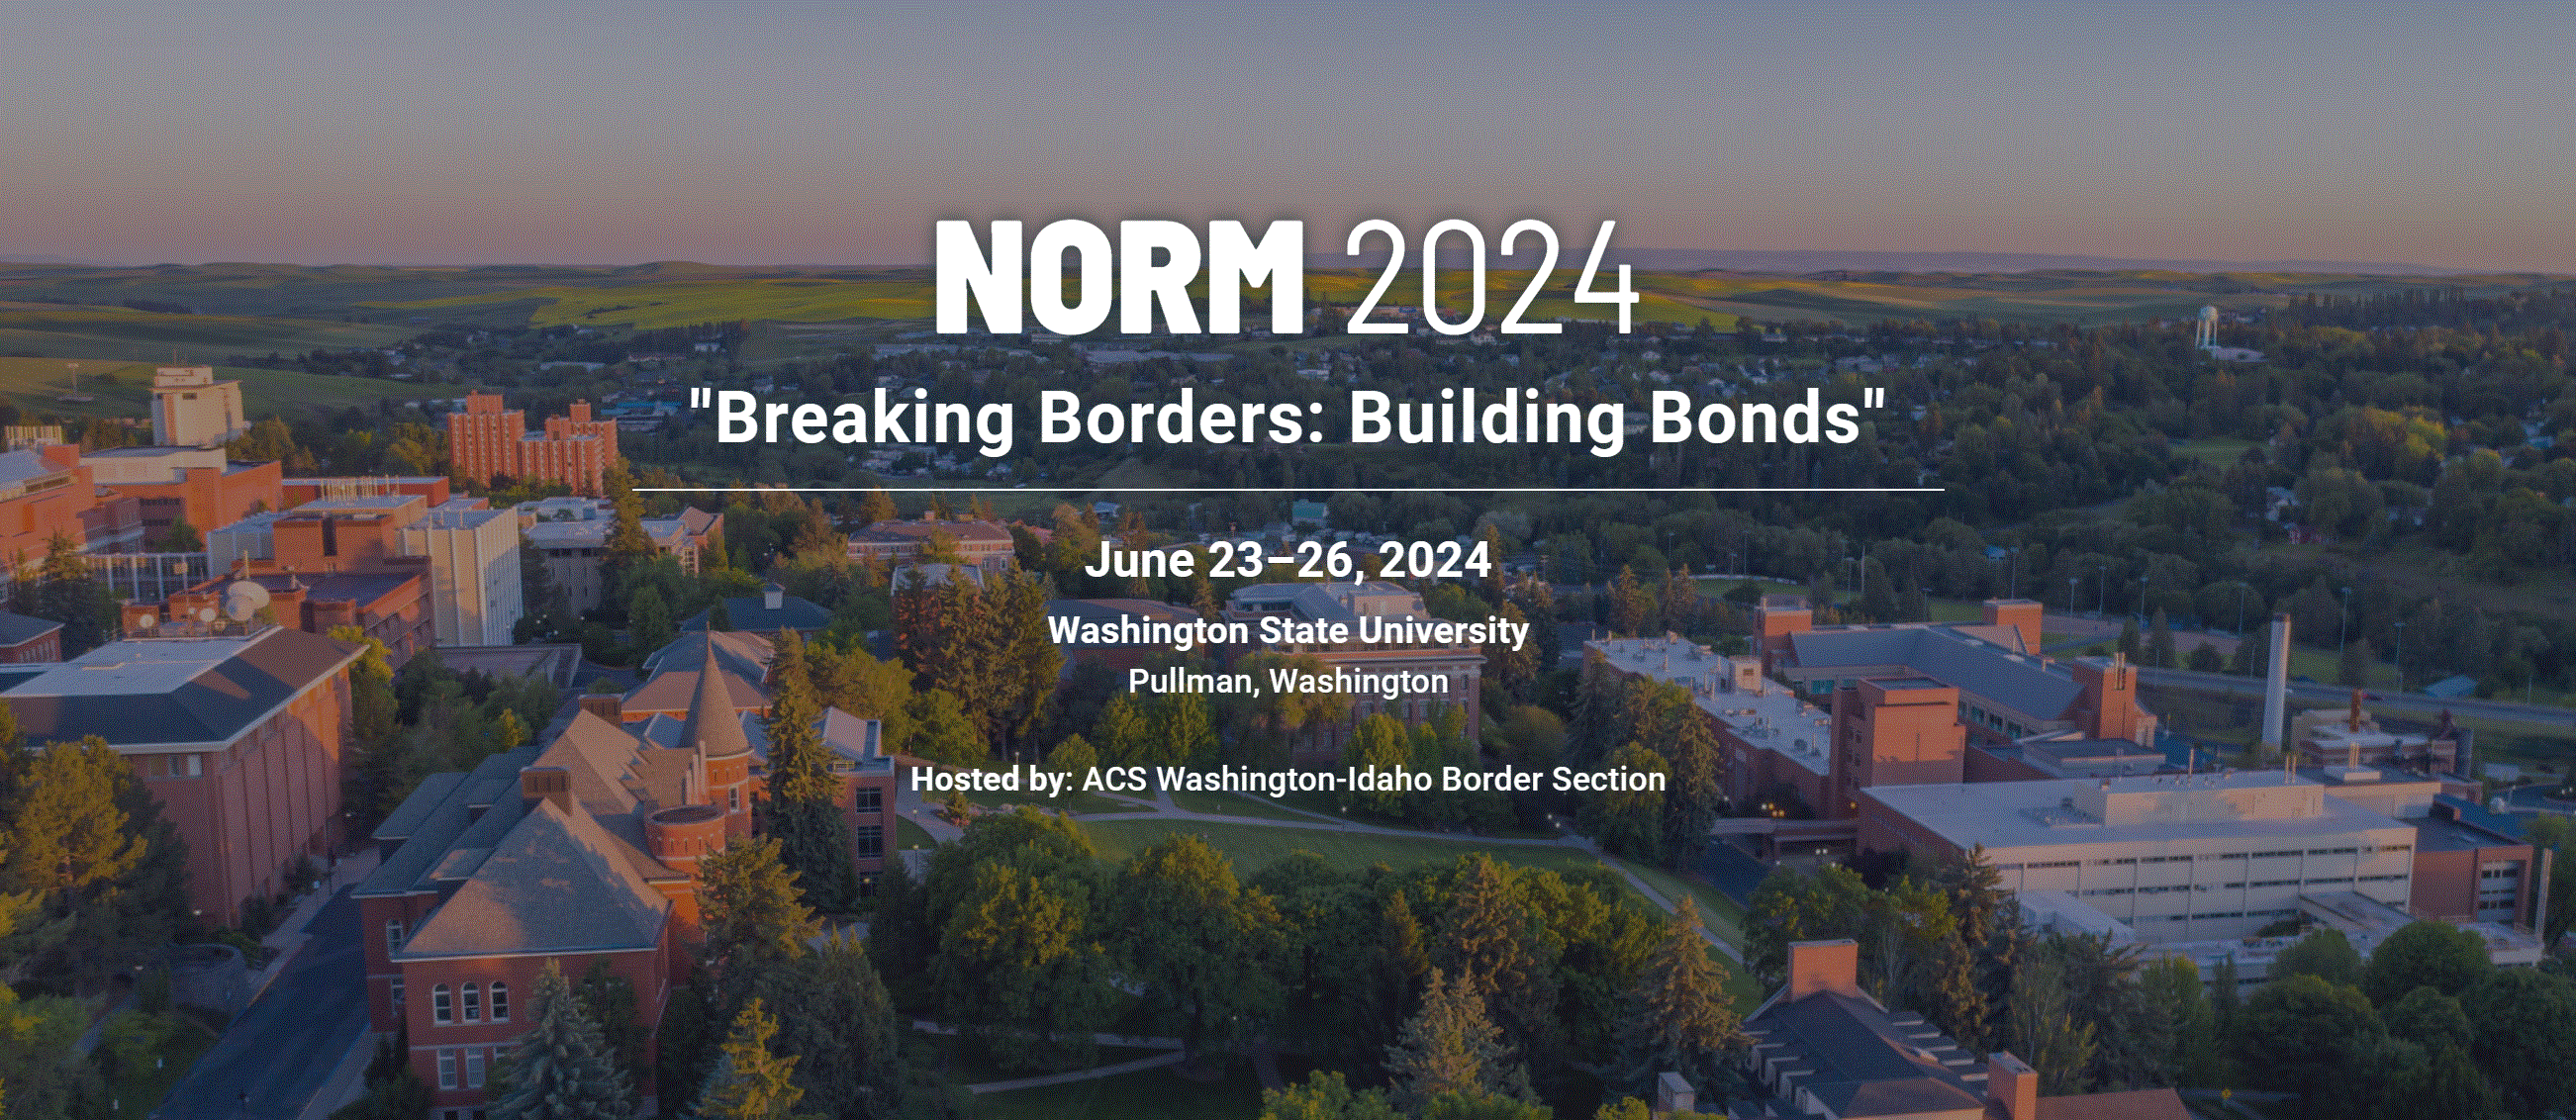 Plan to Attend NORM 2024!